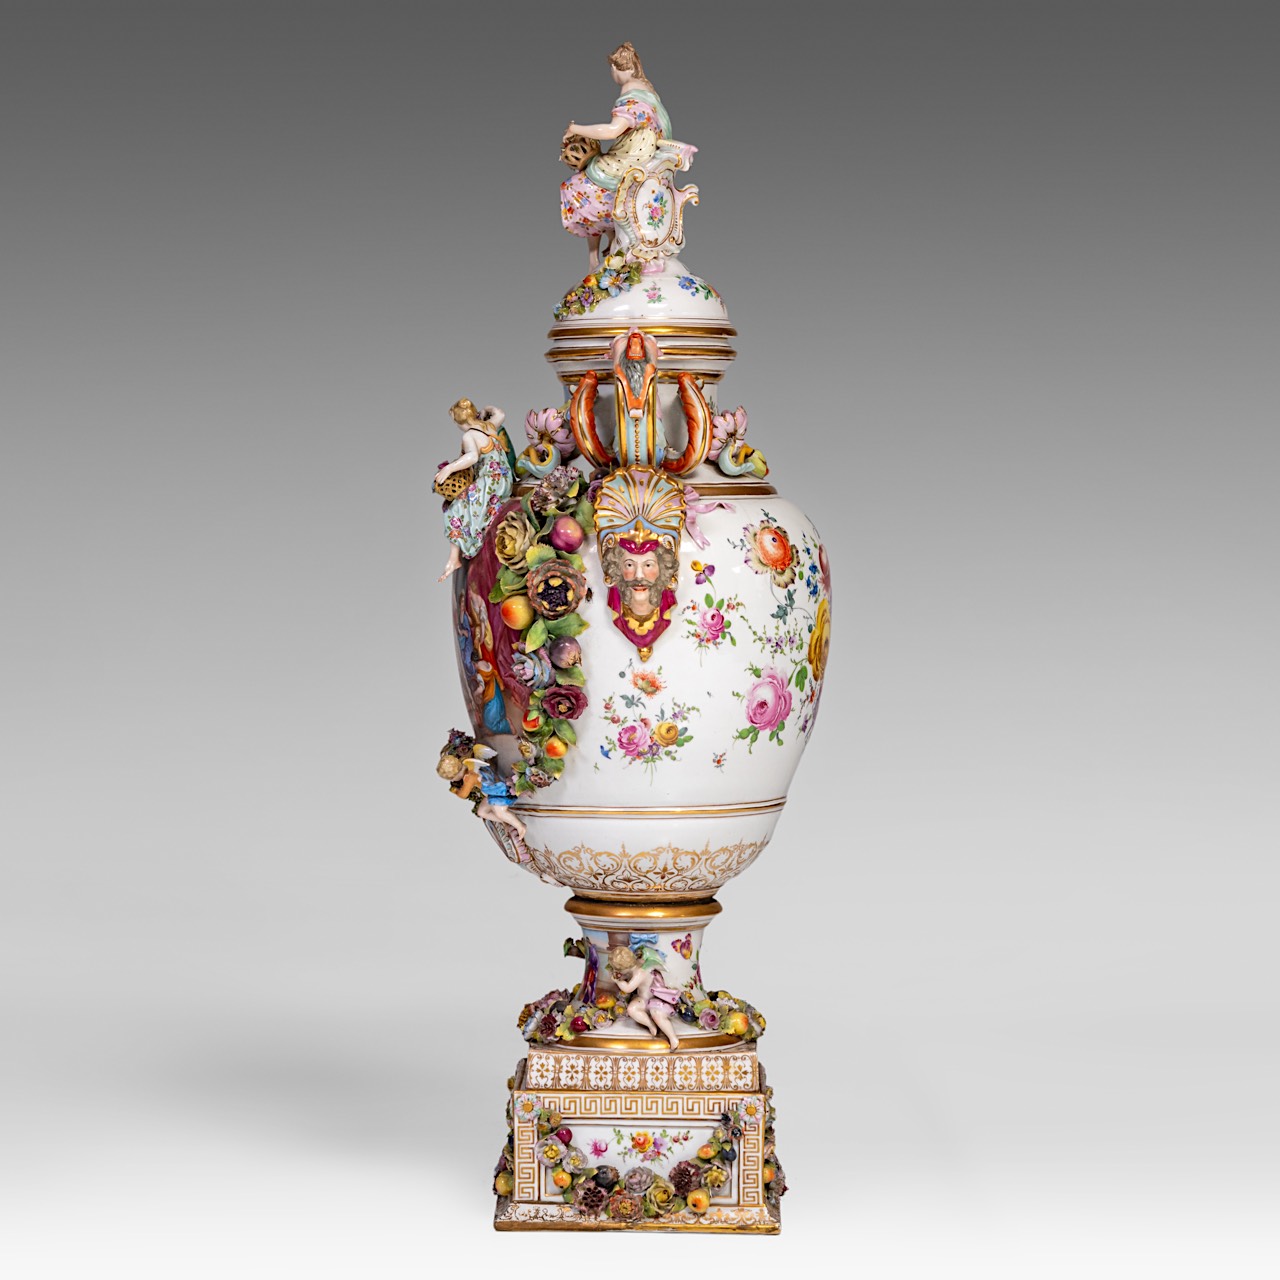 A very imposing Saxony porcelain vase on stand, Postschappel manufactory, Dresden, H 107 cm (total) - Image 3 of 23